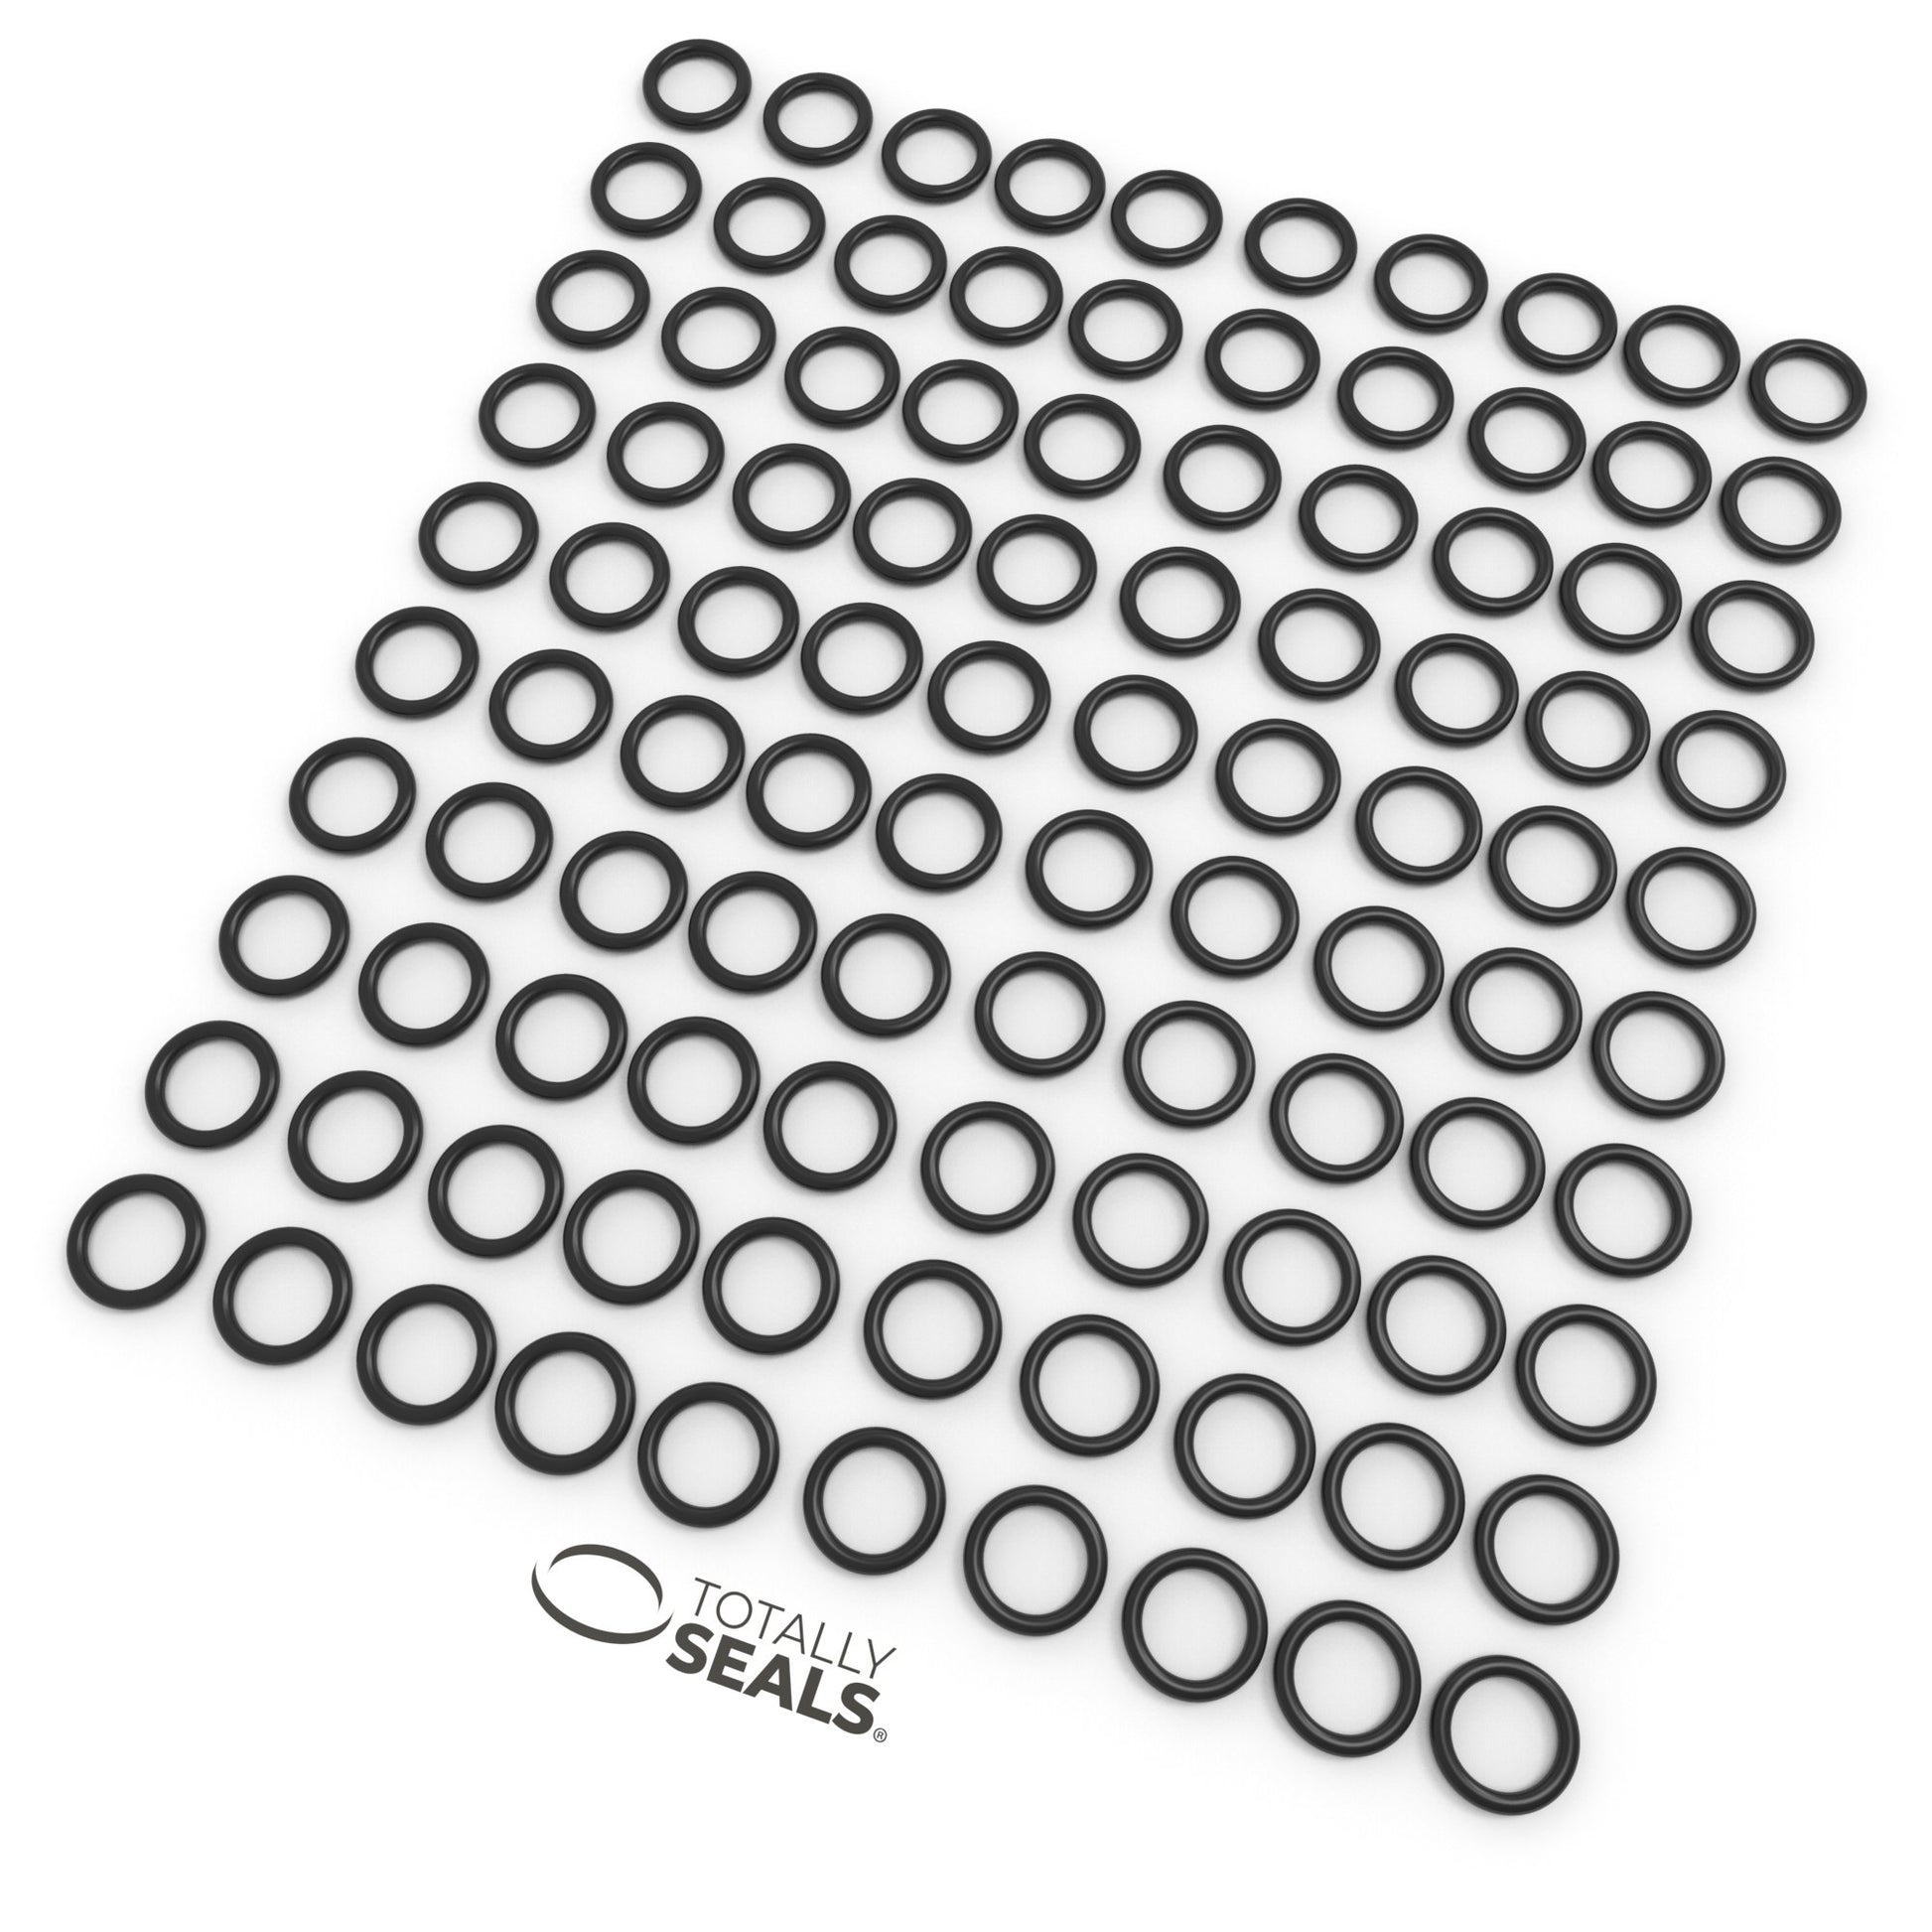 17mm x 3mm (23mm OD) Nitrile O-Rings - Totally Seals®